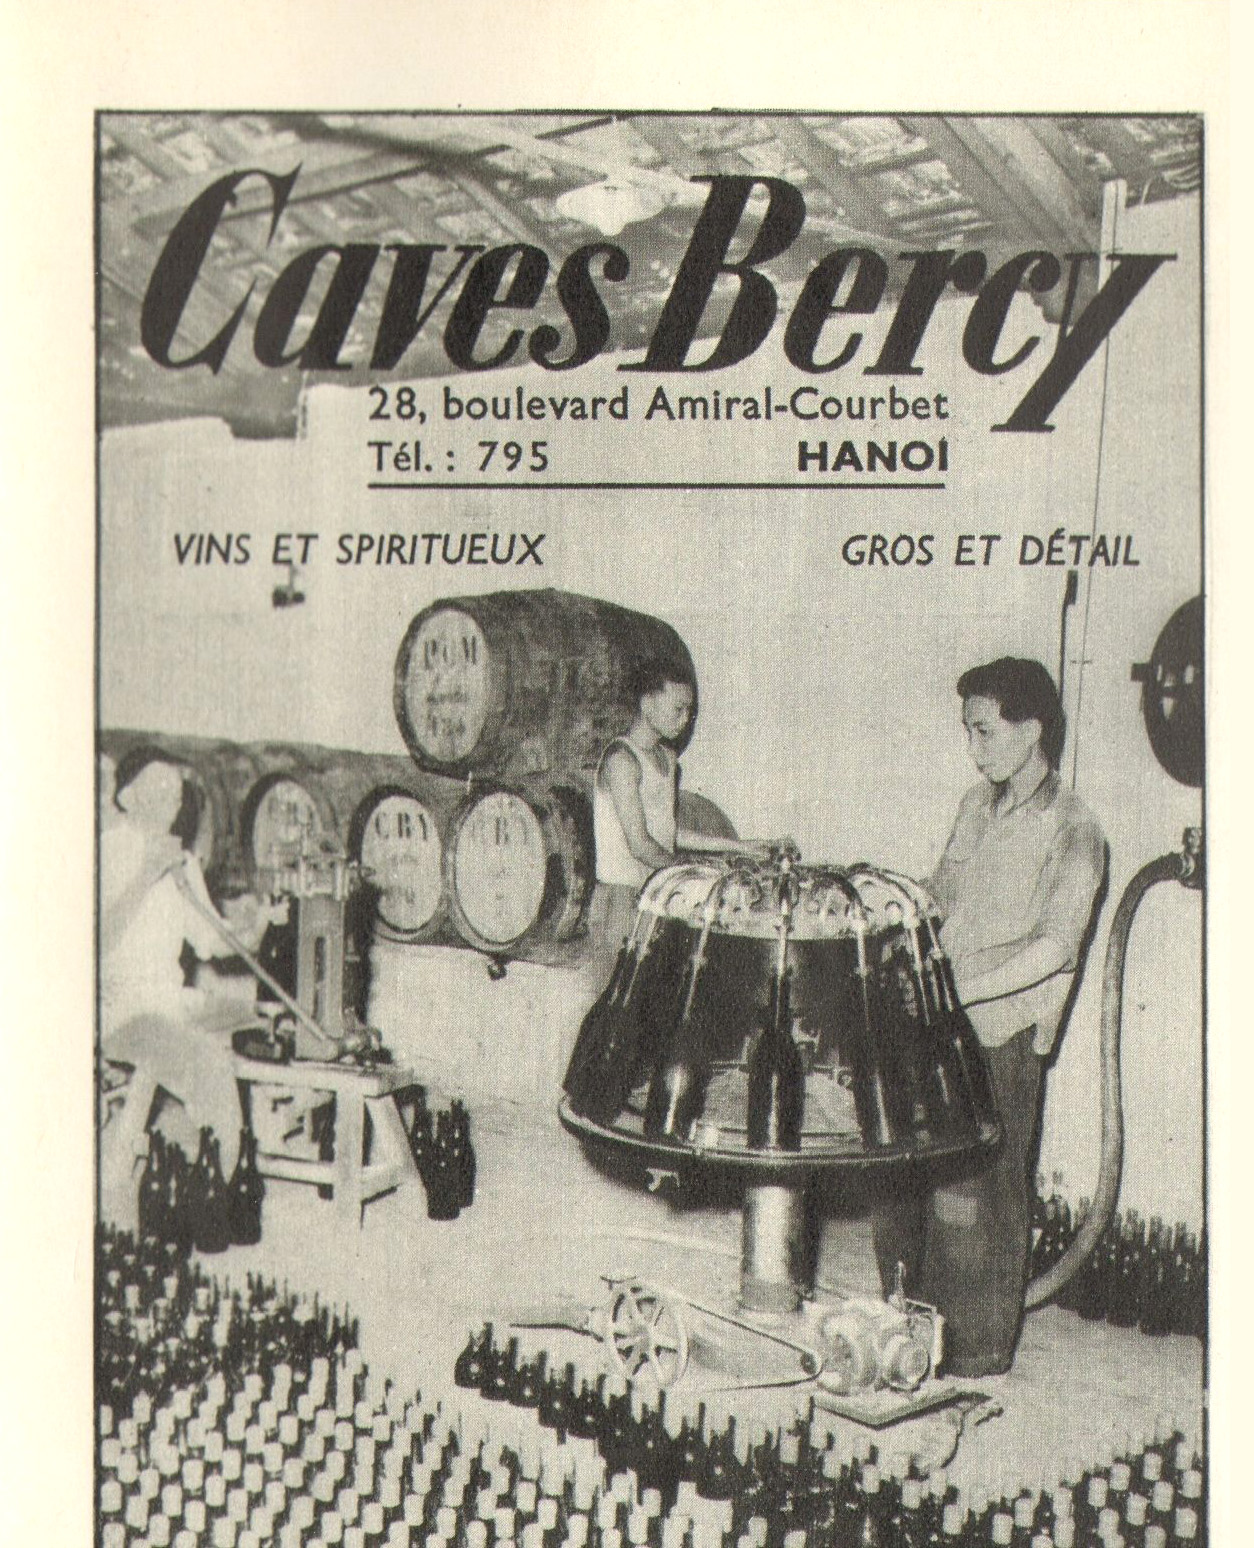 an advertit for an animal - friendly wine nd, capets berry